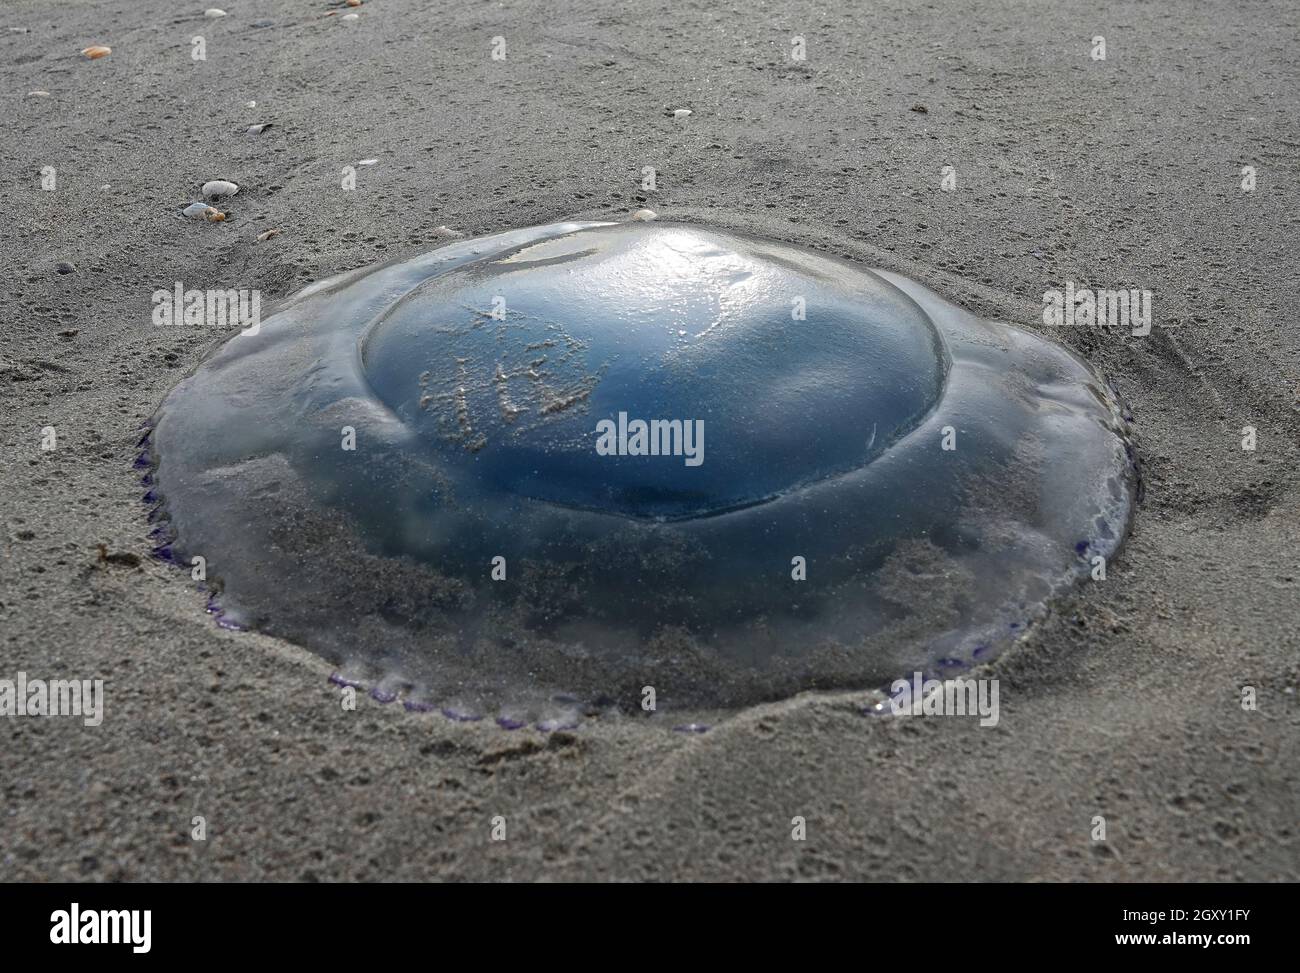 A barrel jellyfish, that can become very large, has been washed ashore on this autumn day at the North Sea. Stock Photo